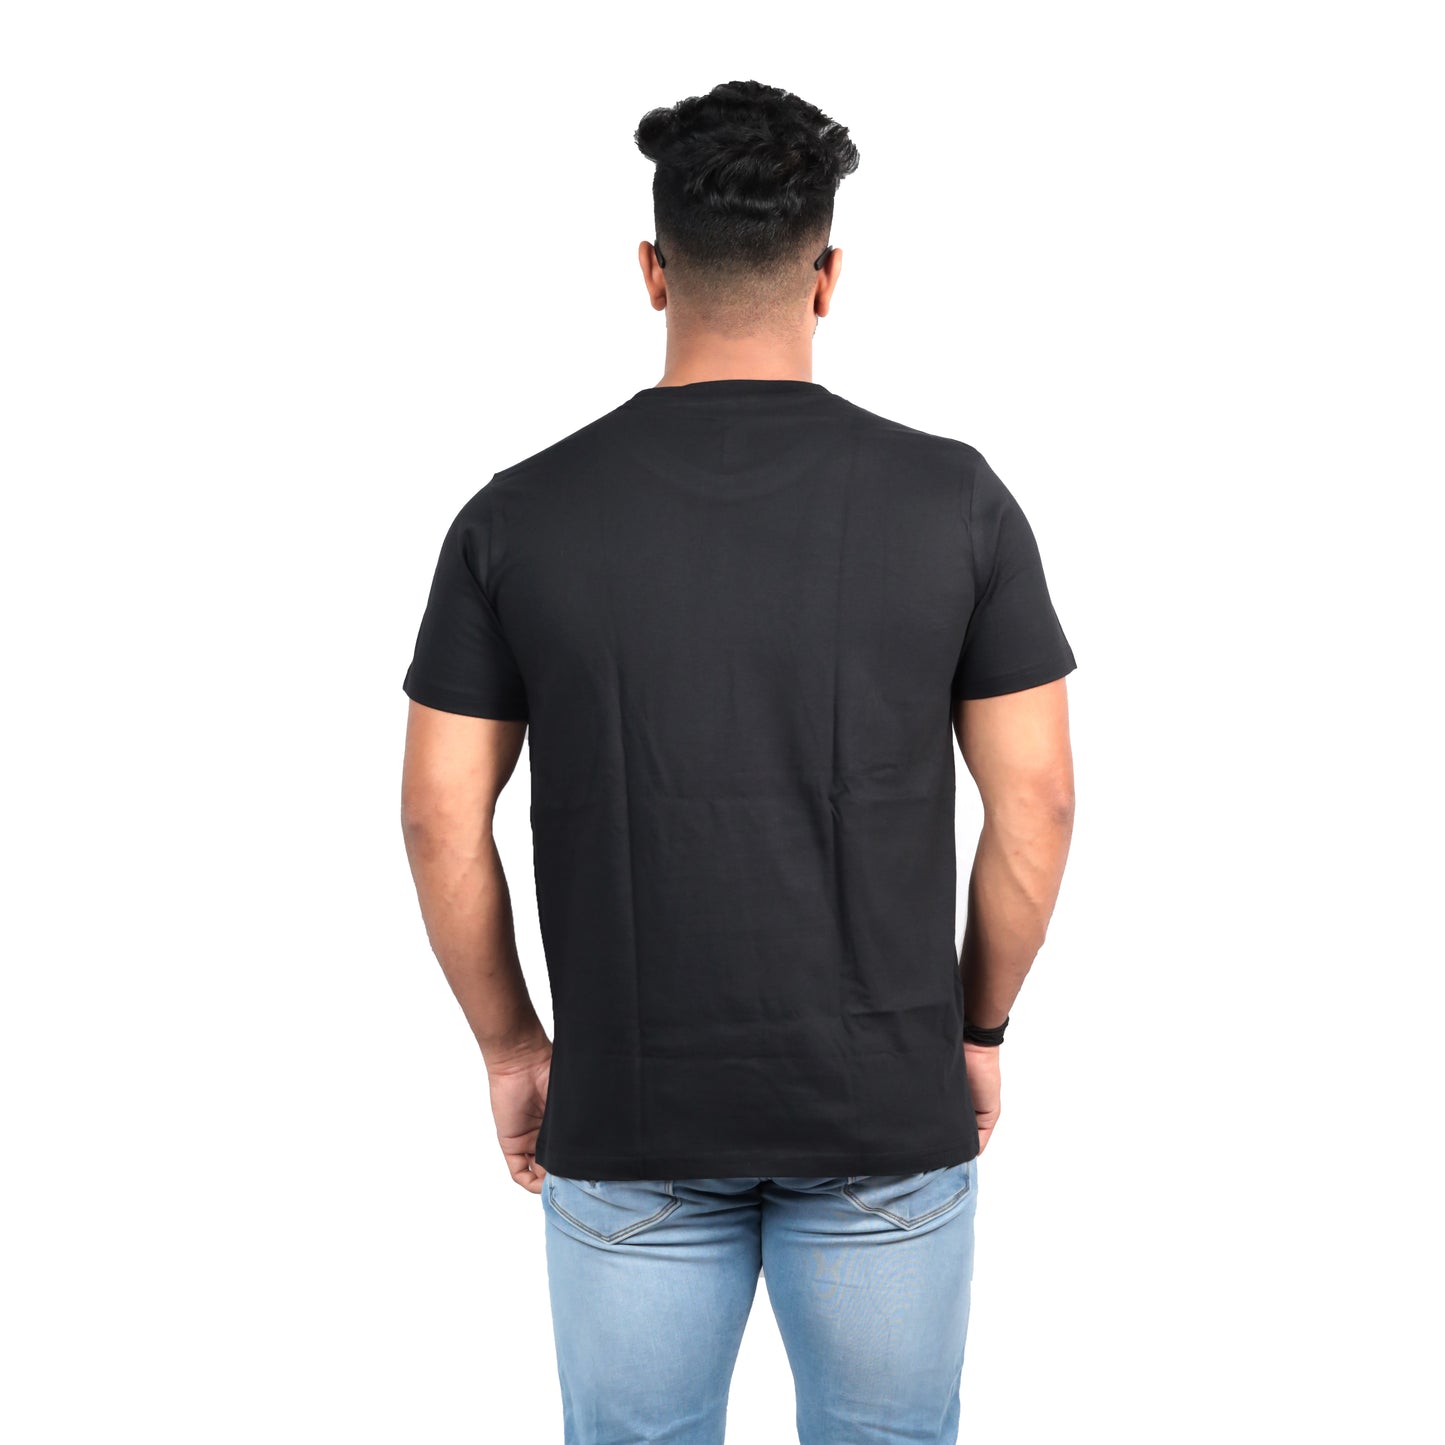 Nirvana Dolphin Printed T-shirt In Black Color For Men